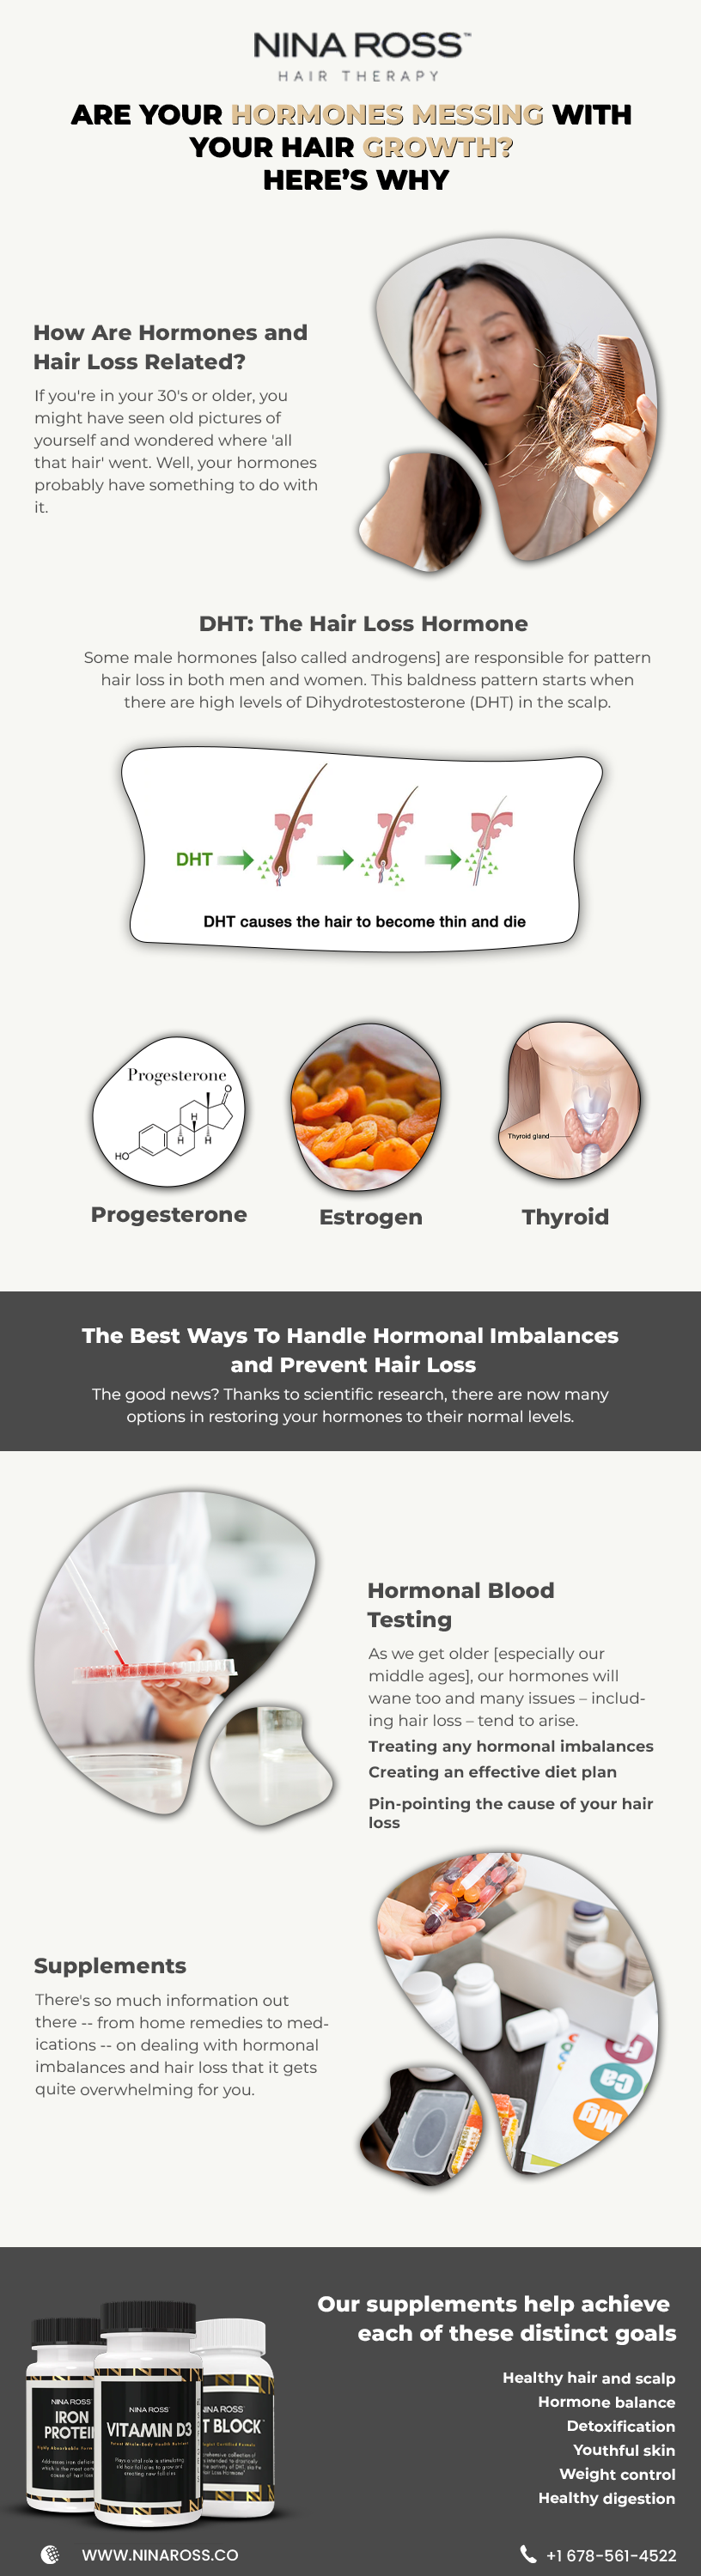 Hair Loss Compounded Medical Solutions For Men and Women